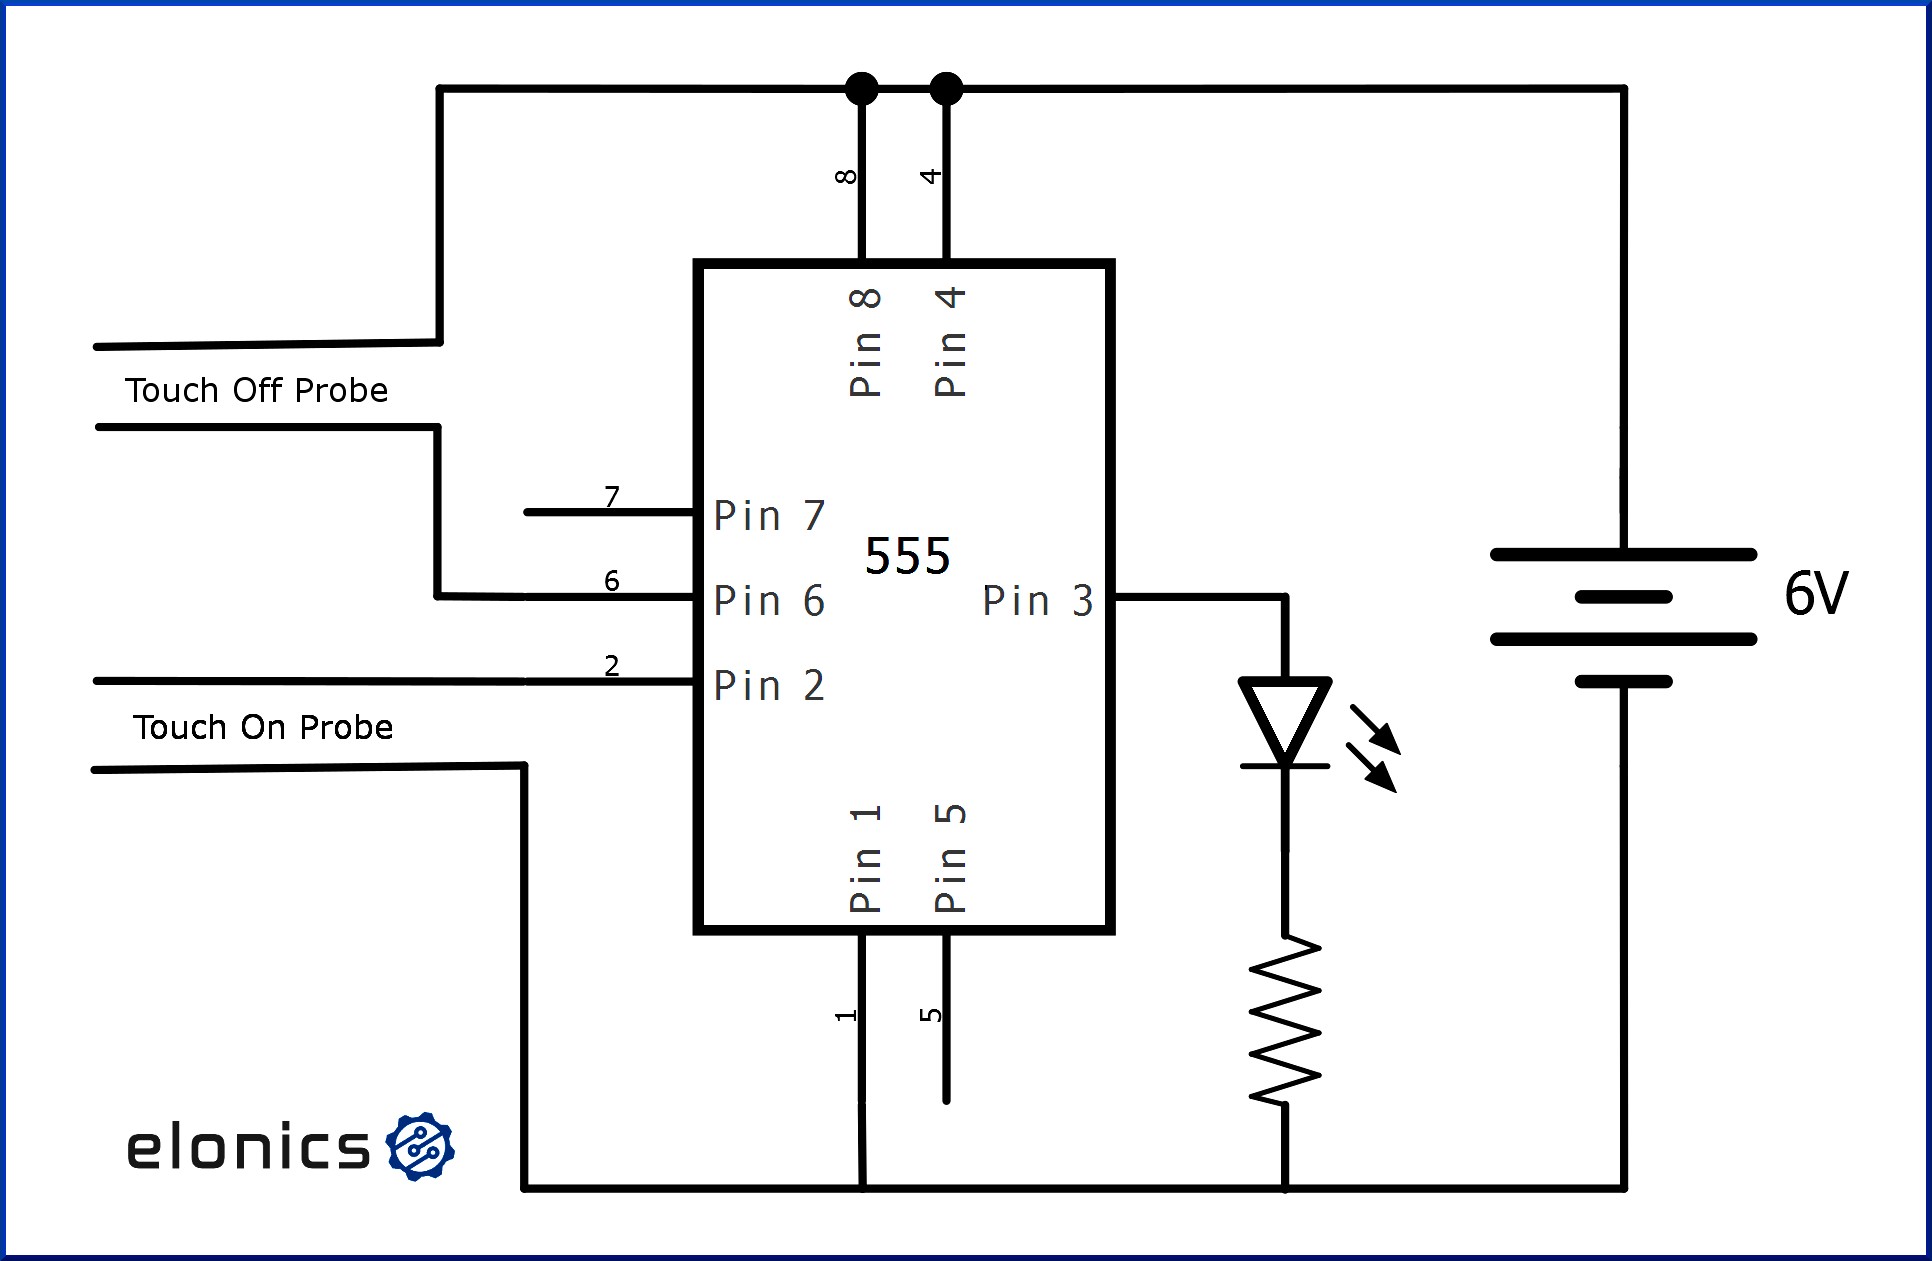 Delightful Touch f Switch Using Timer Ic Elonics Circuit Schematic Full Full size